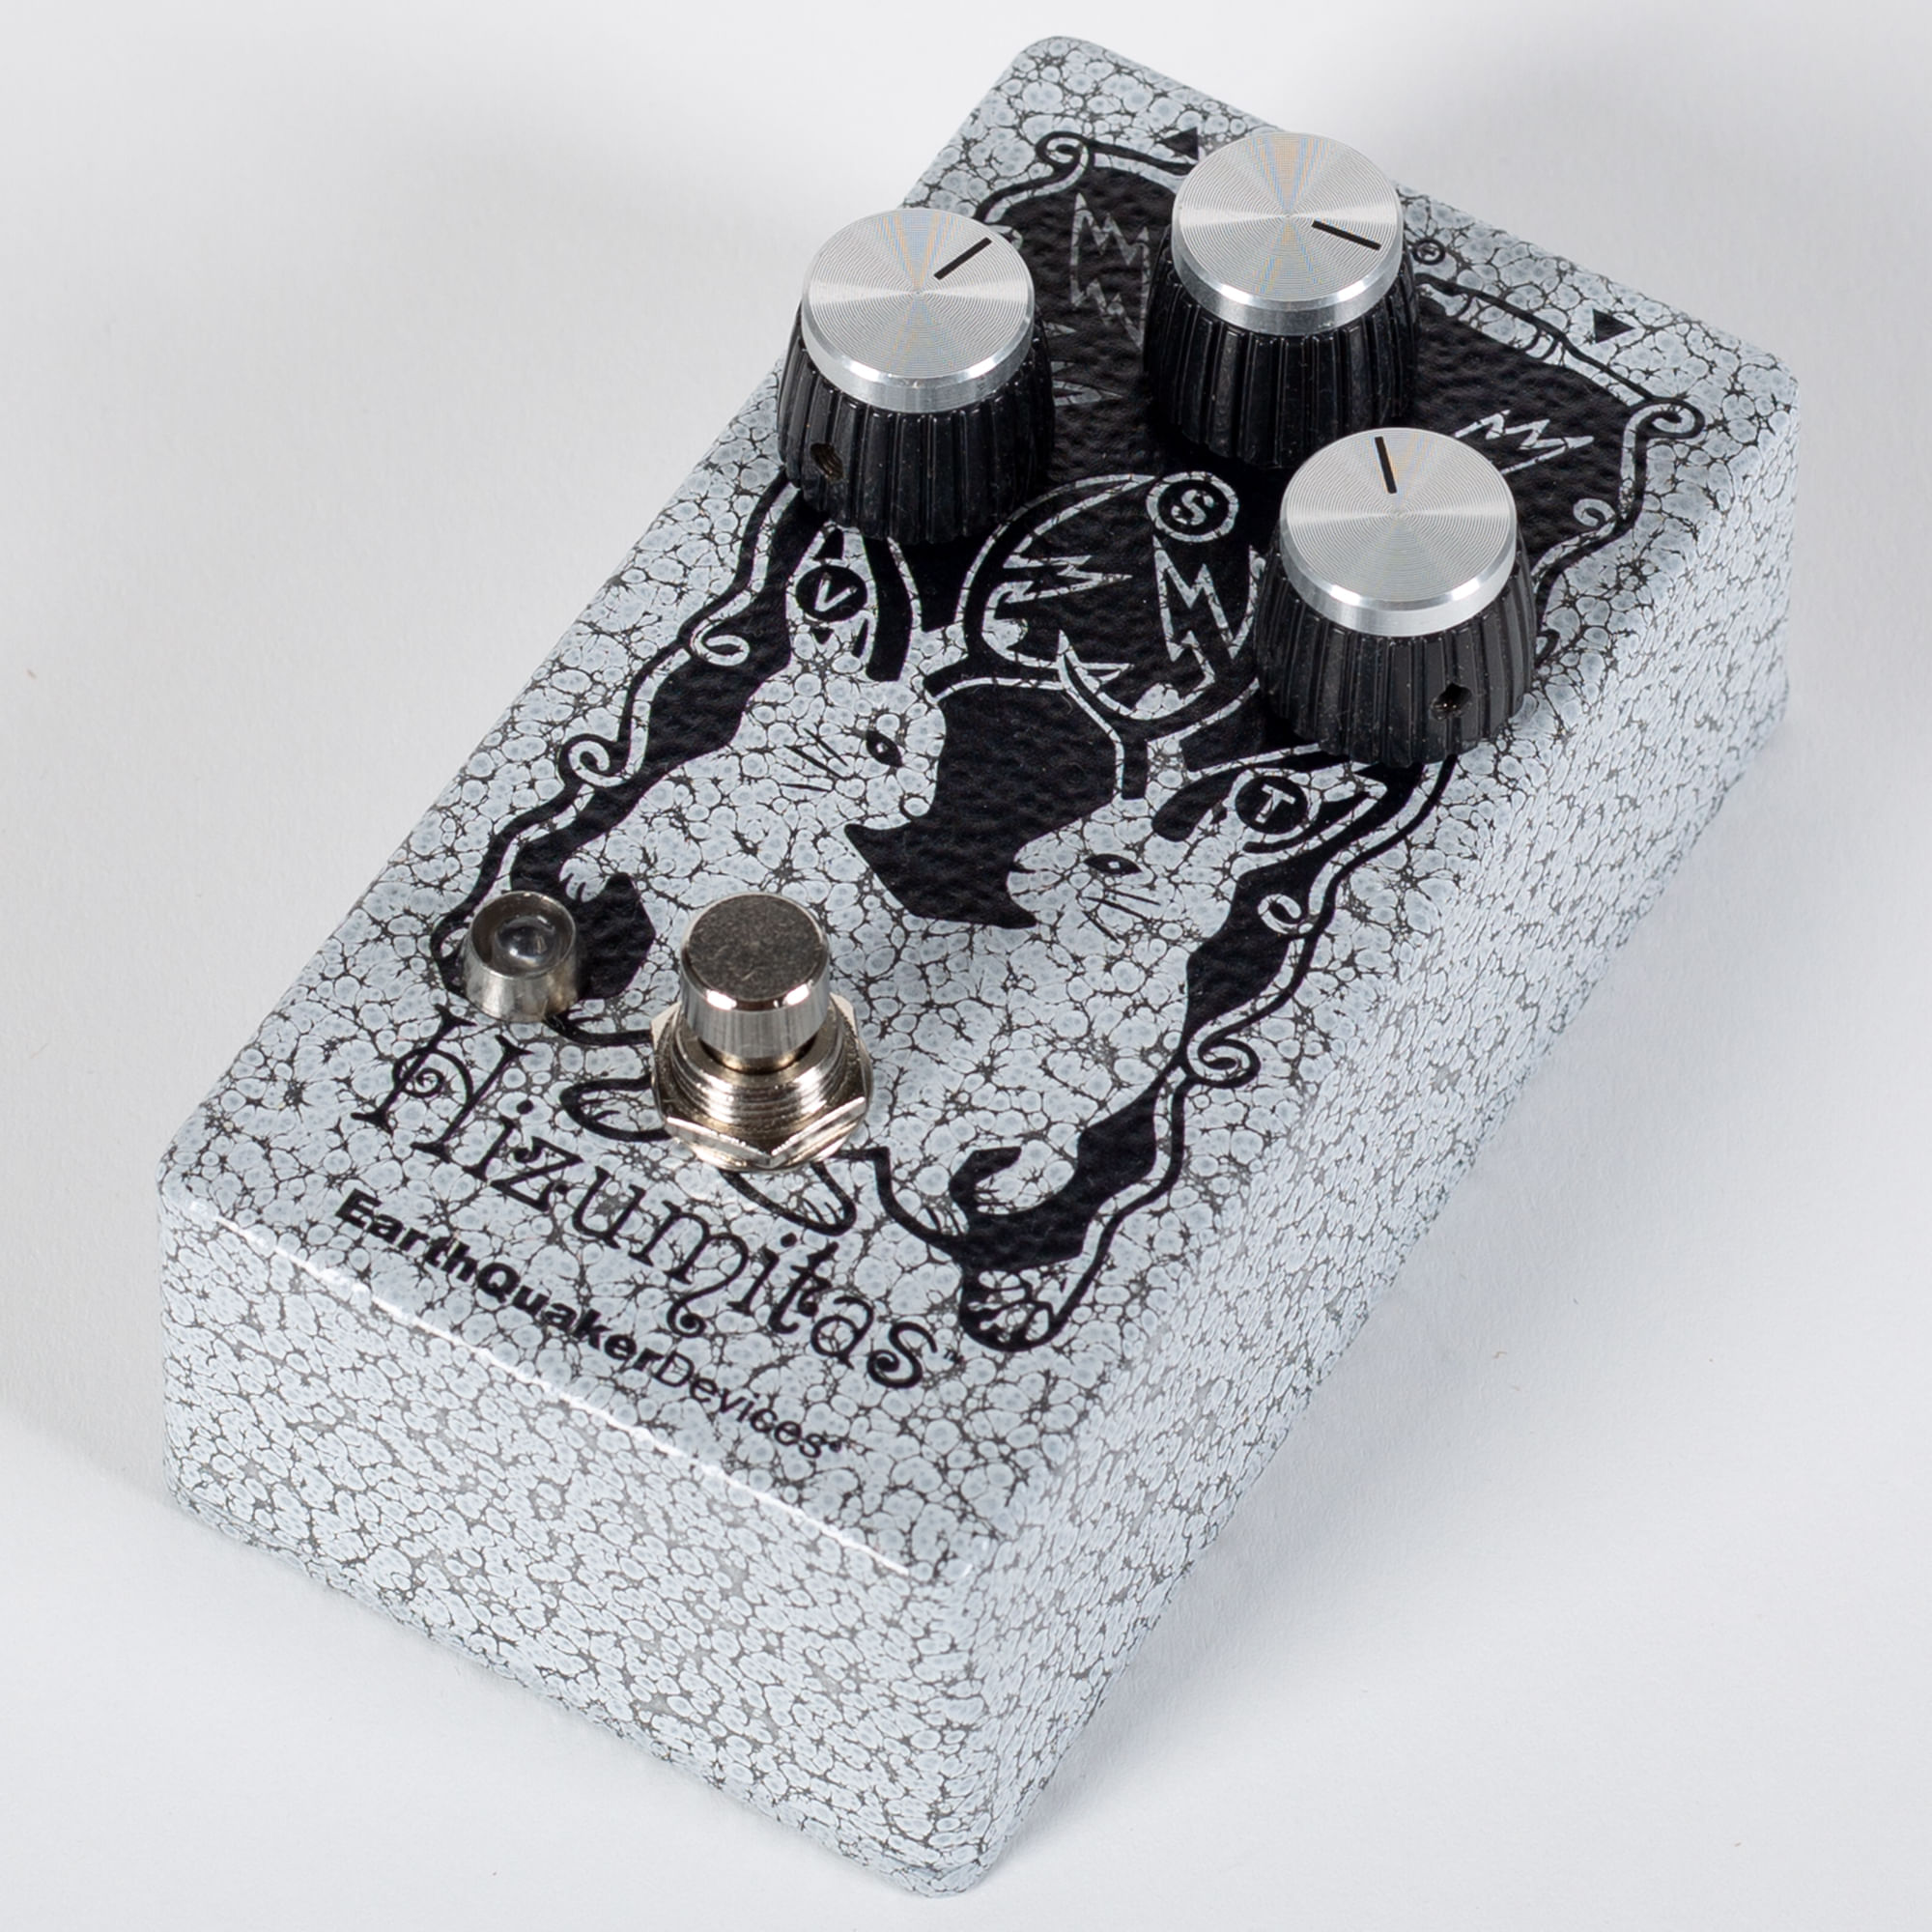 EarthQuaker Hizumitas Fuzz Sustainer Pedal - Limited Edition White Vein